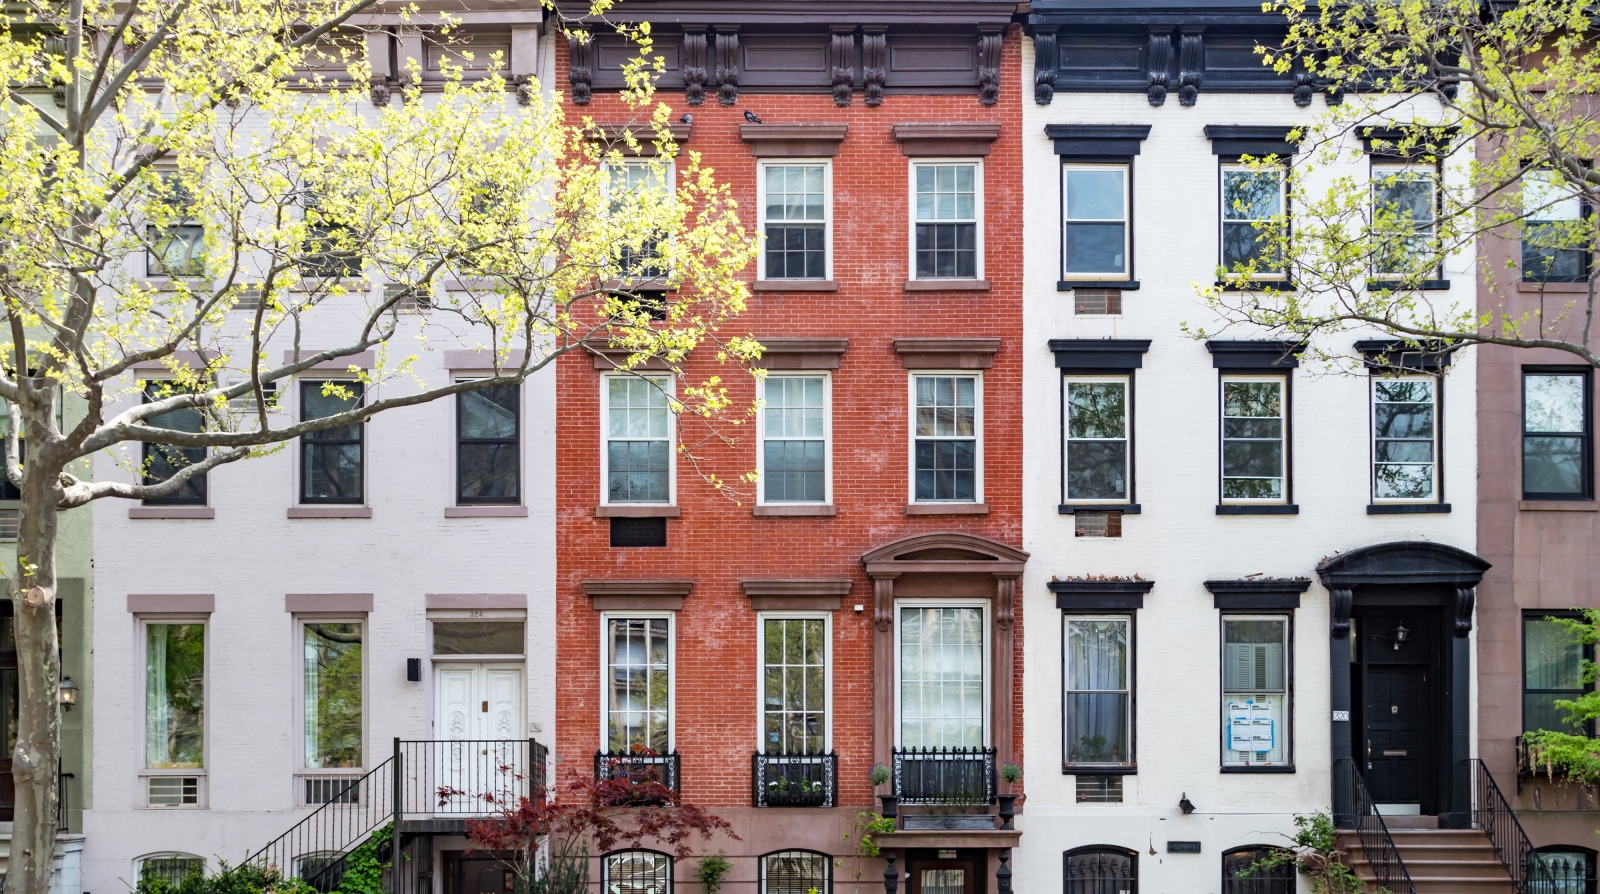 types of townhouses in NYC a row of brick townhouses